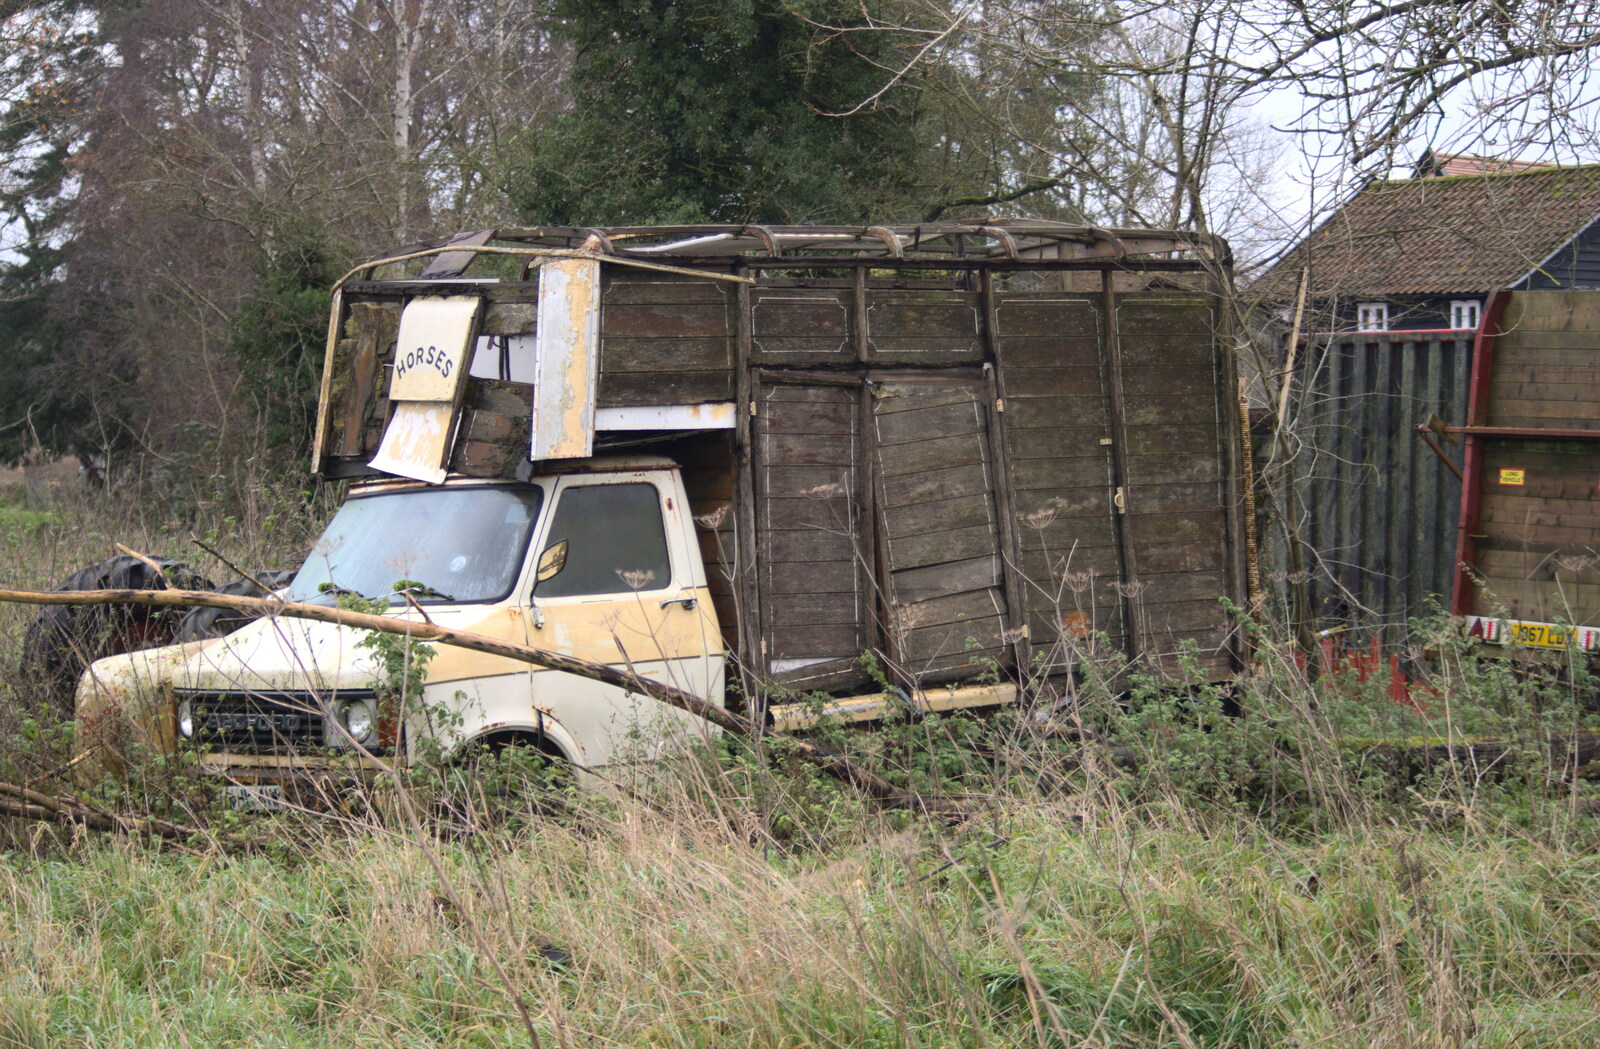 A derelict horse box from More Frosty Rides and the Old Mink Sheds, Brome, Suffolk - 10th December 2020